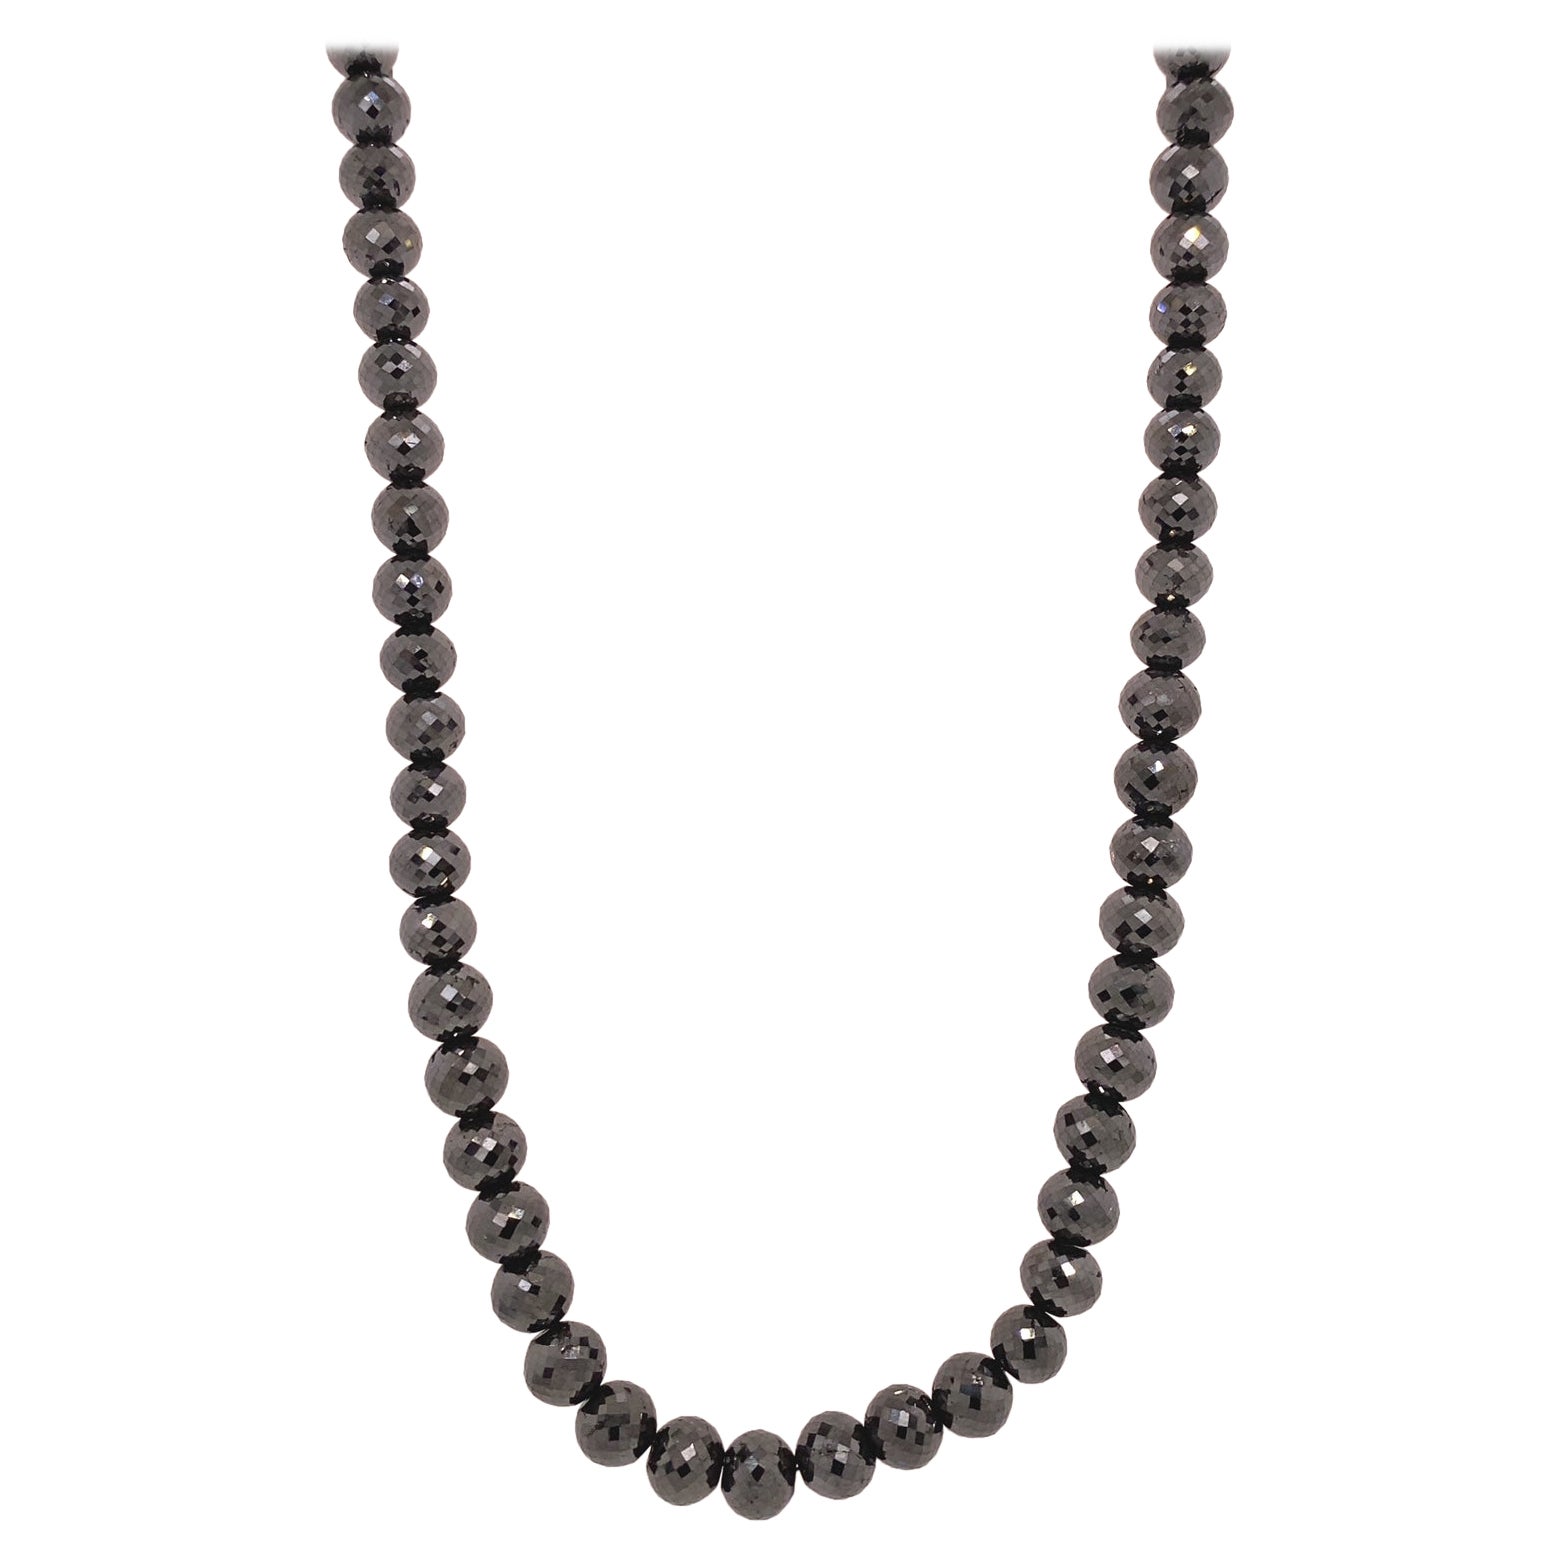 100.17 Carat Black Diamond Faceted Necklace with a White Gold Diamond Clasp